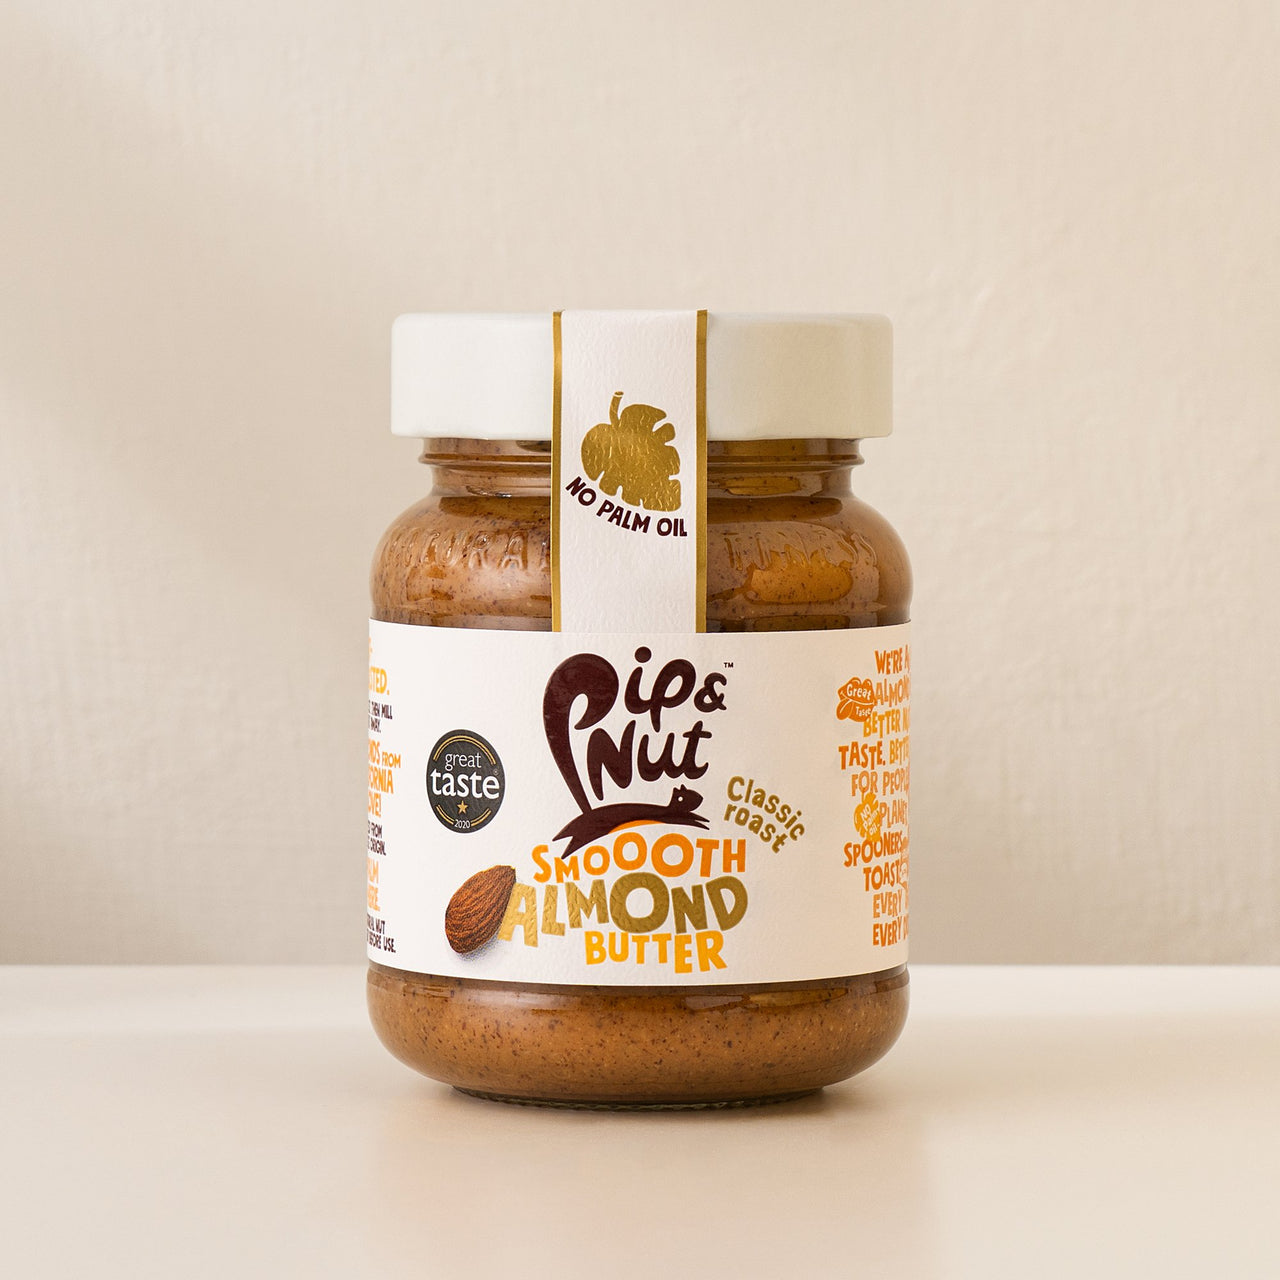 SMOOTH ALMOND BUTTER